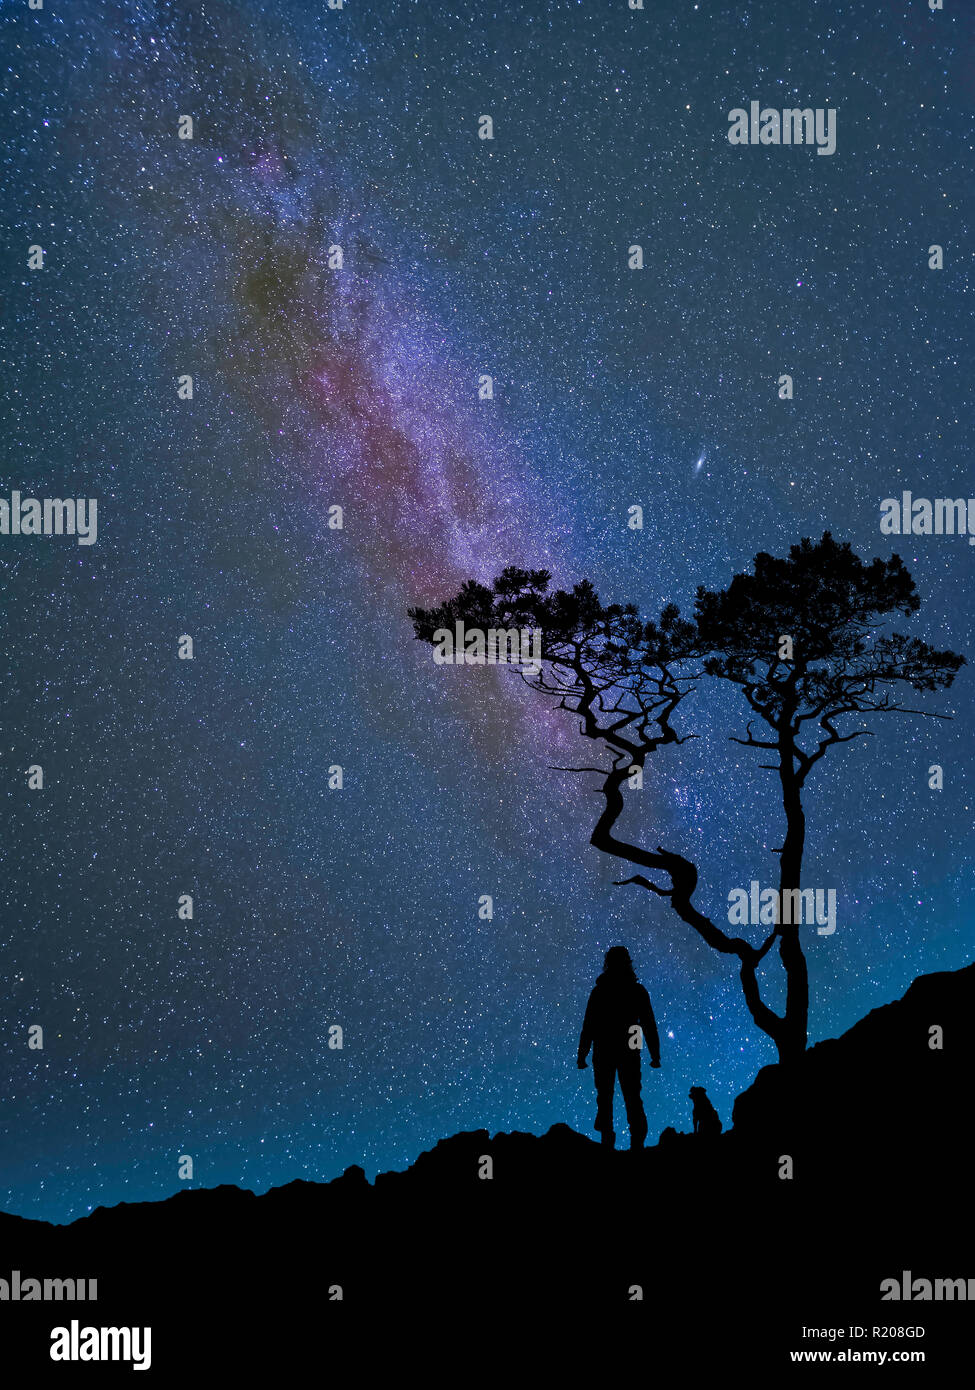 Milky way and silhouettes of a Pine tree, a person and a dog. Stock Photo